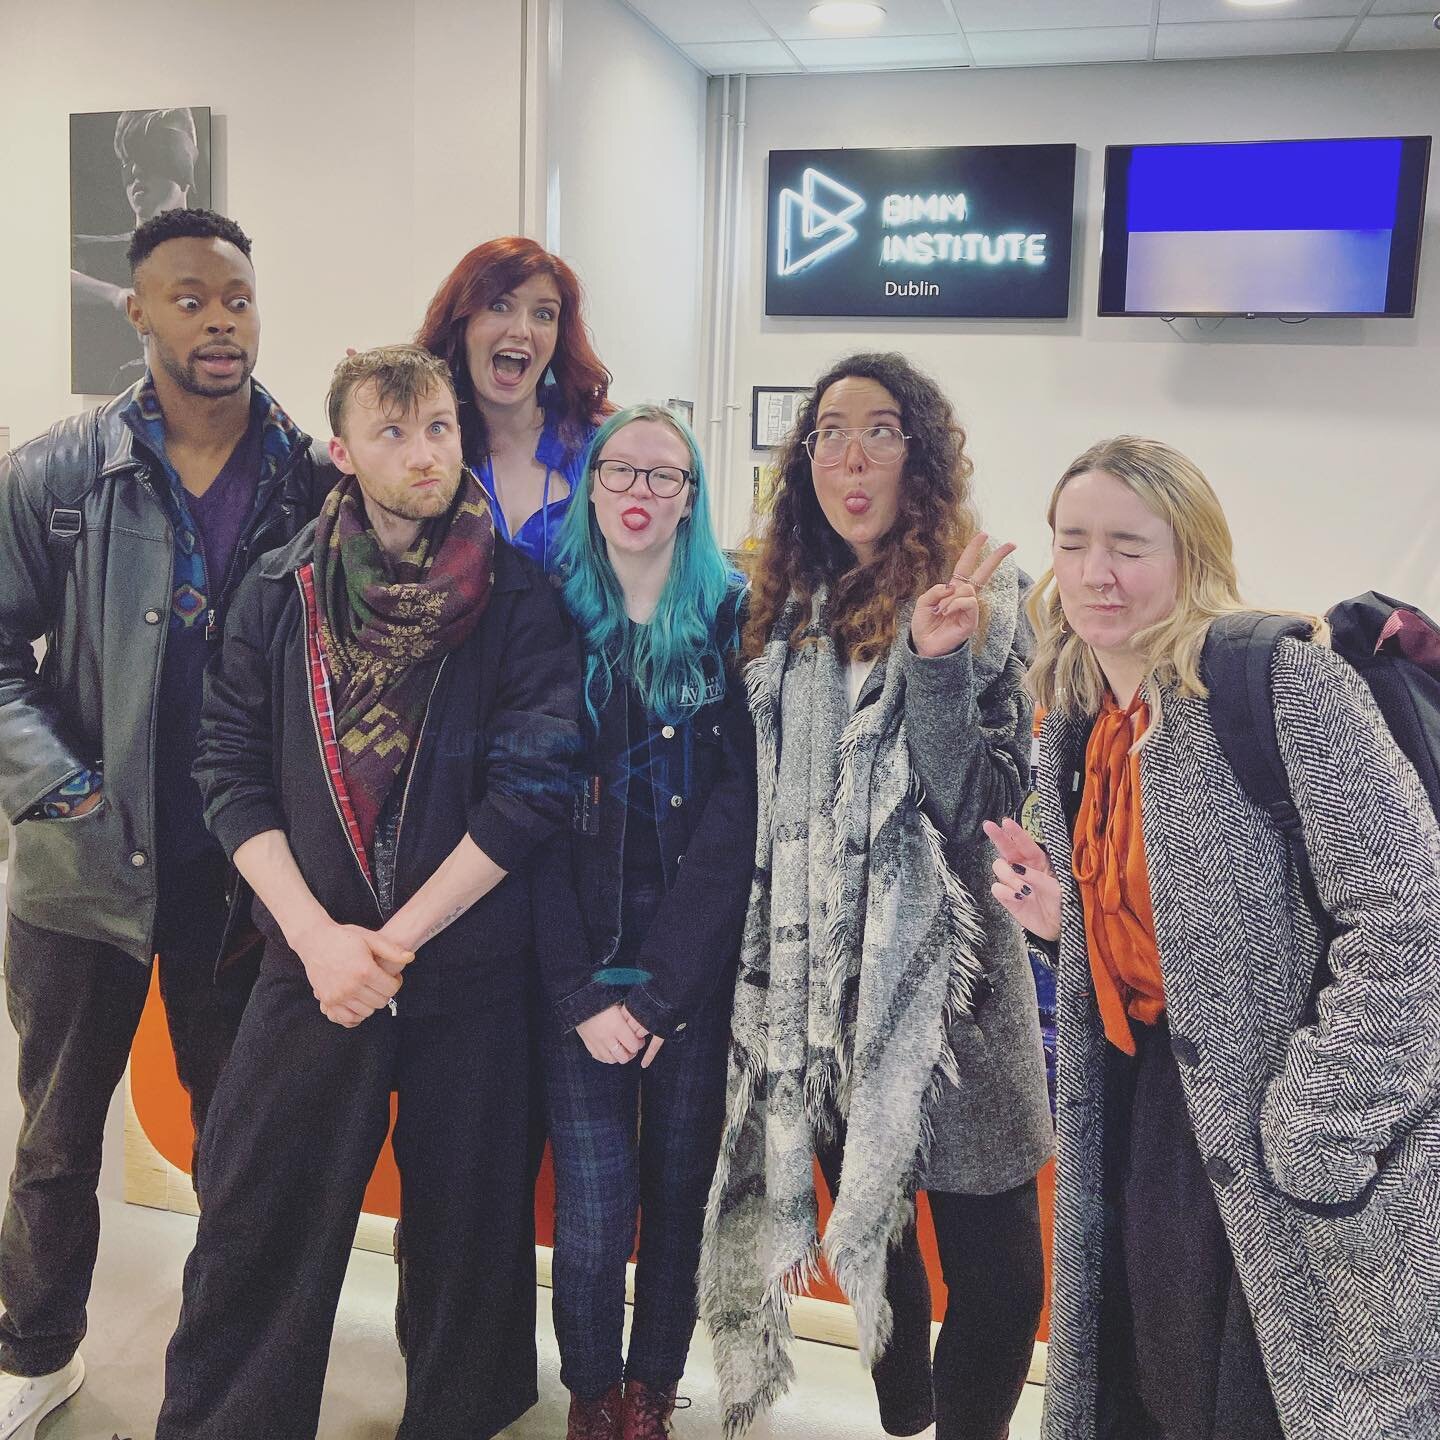 I always forget to take photos when I&rsquo;m doing a workshop&hellip;so here&rsquo;s a fun post-workshop photo with some of our keen beans instead! (Anyone else who was burning to ask me a question but couldn&rsquo;t wait around after, please do pop